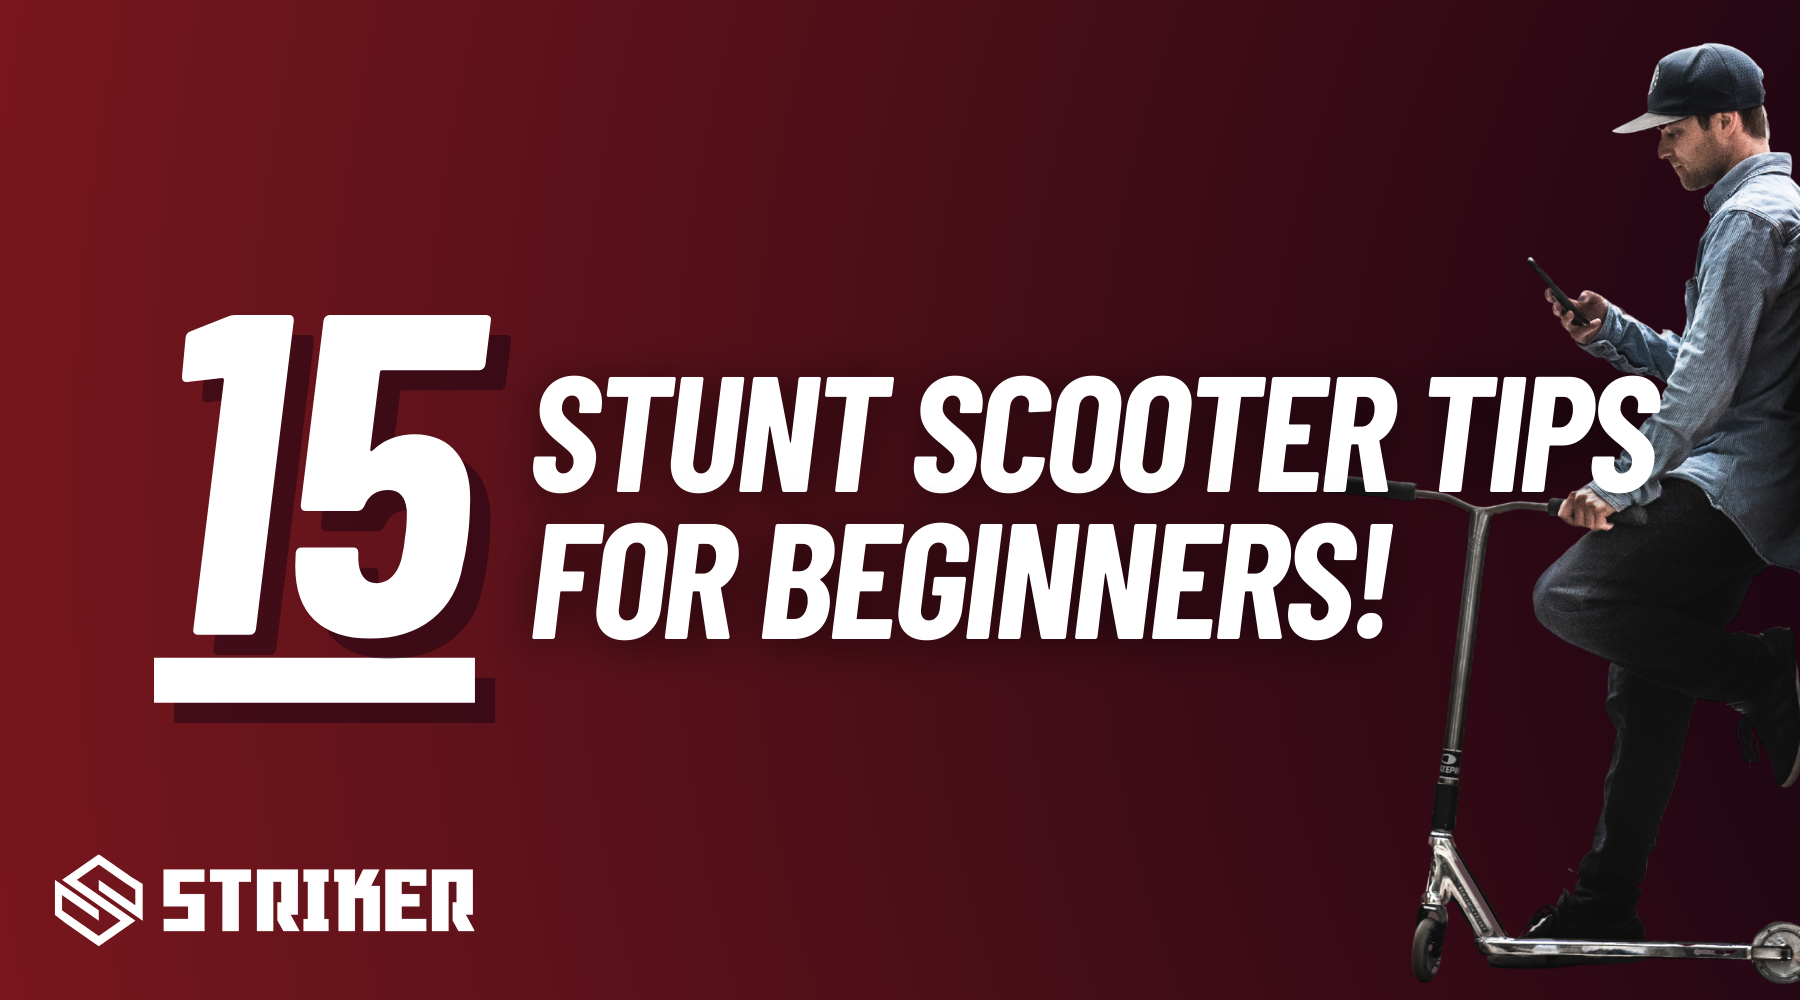 stunt scooter tips for beginners